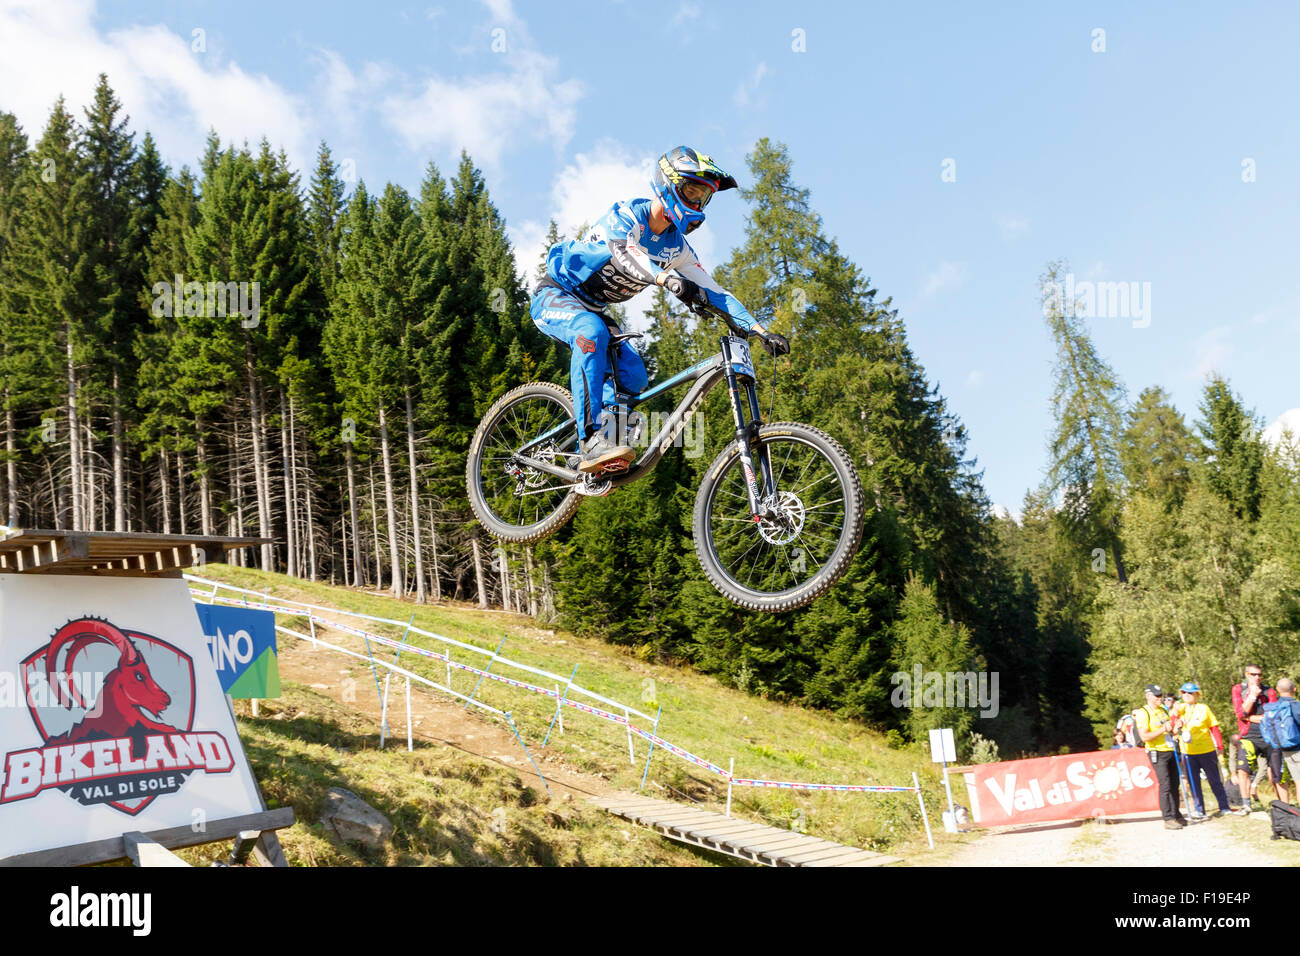 Val Di Sole, Italy - 22 August 2015: Giant Factory Off-Road Team, Rider Cauvin Guillaume in action during the mens elite Downhill final World Cup at the Uci Mountain Bike in Val di Sole, Trento, Italy Stock Photo